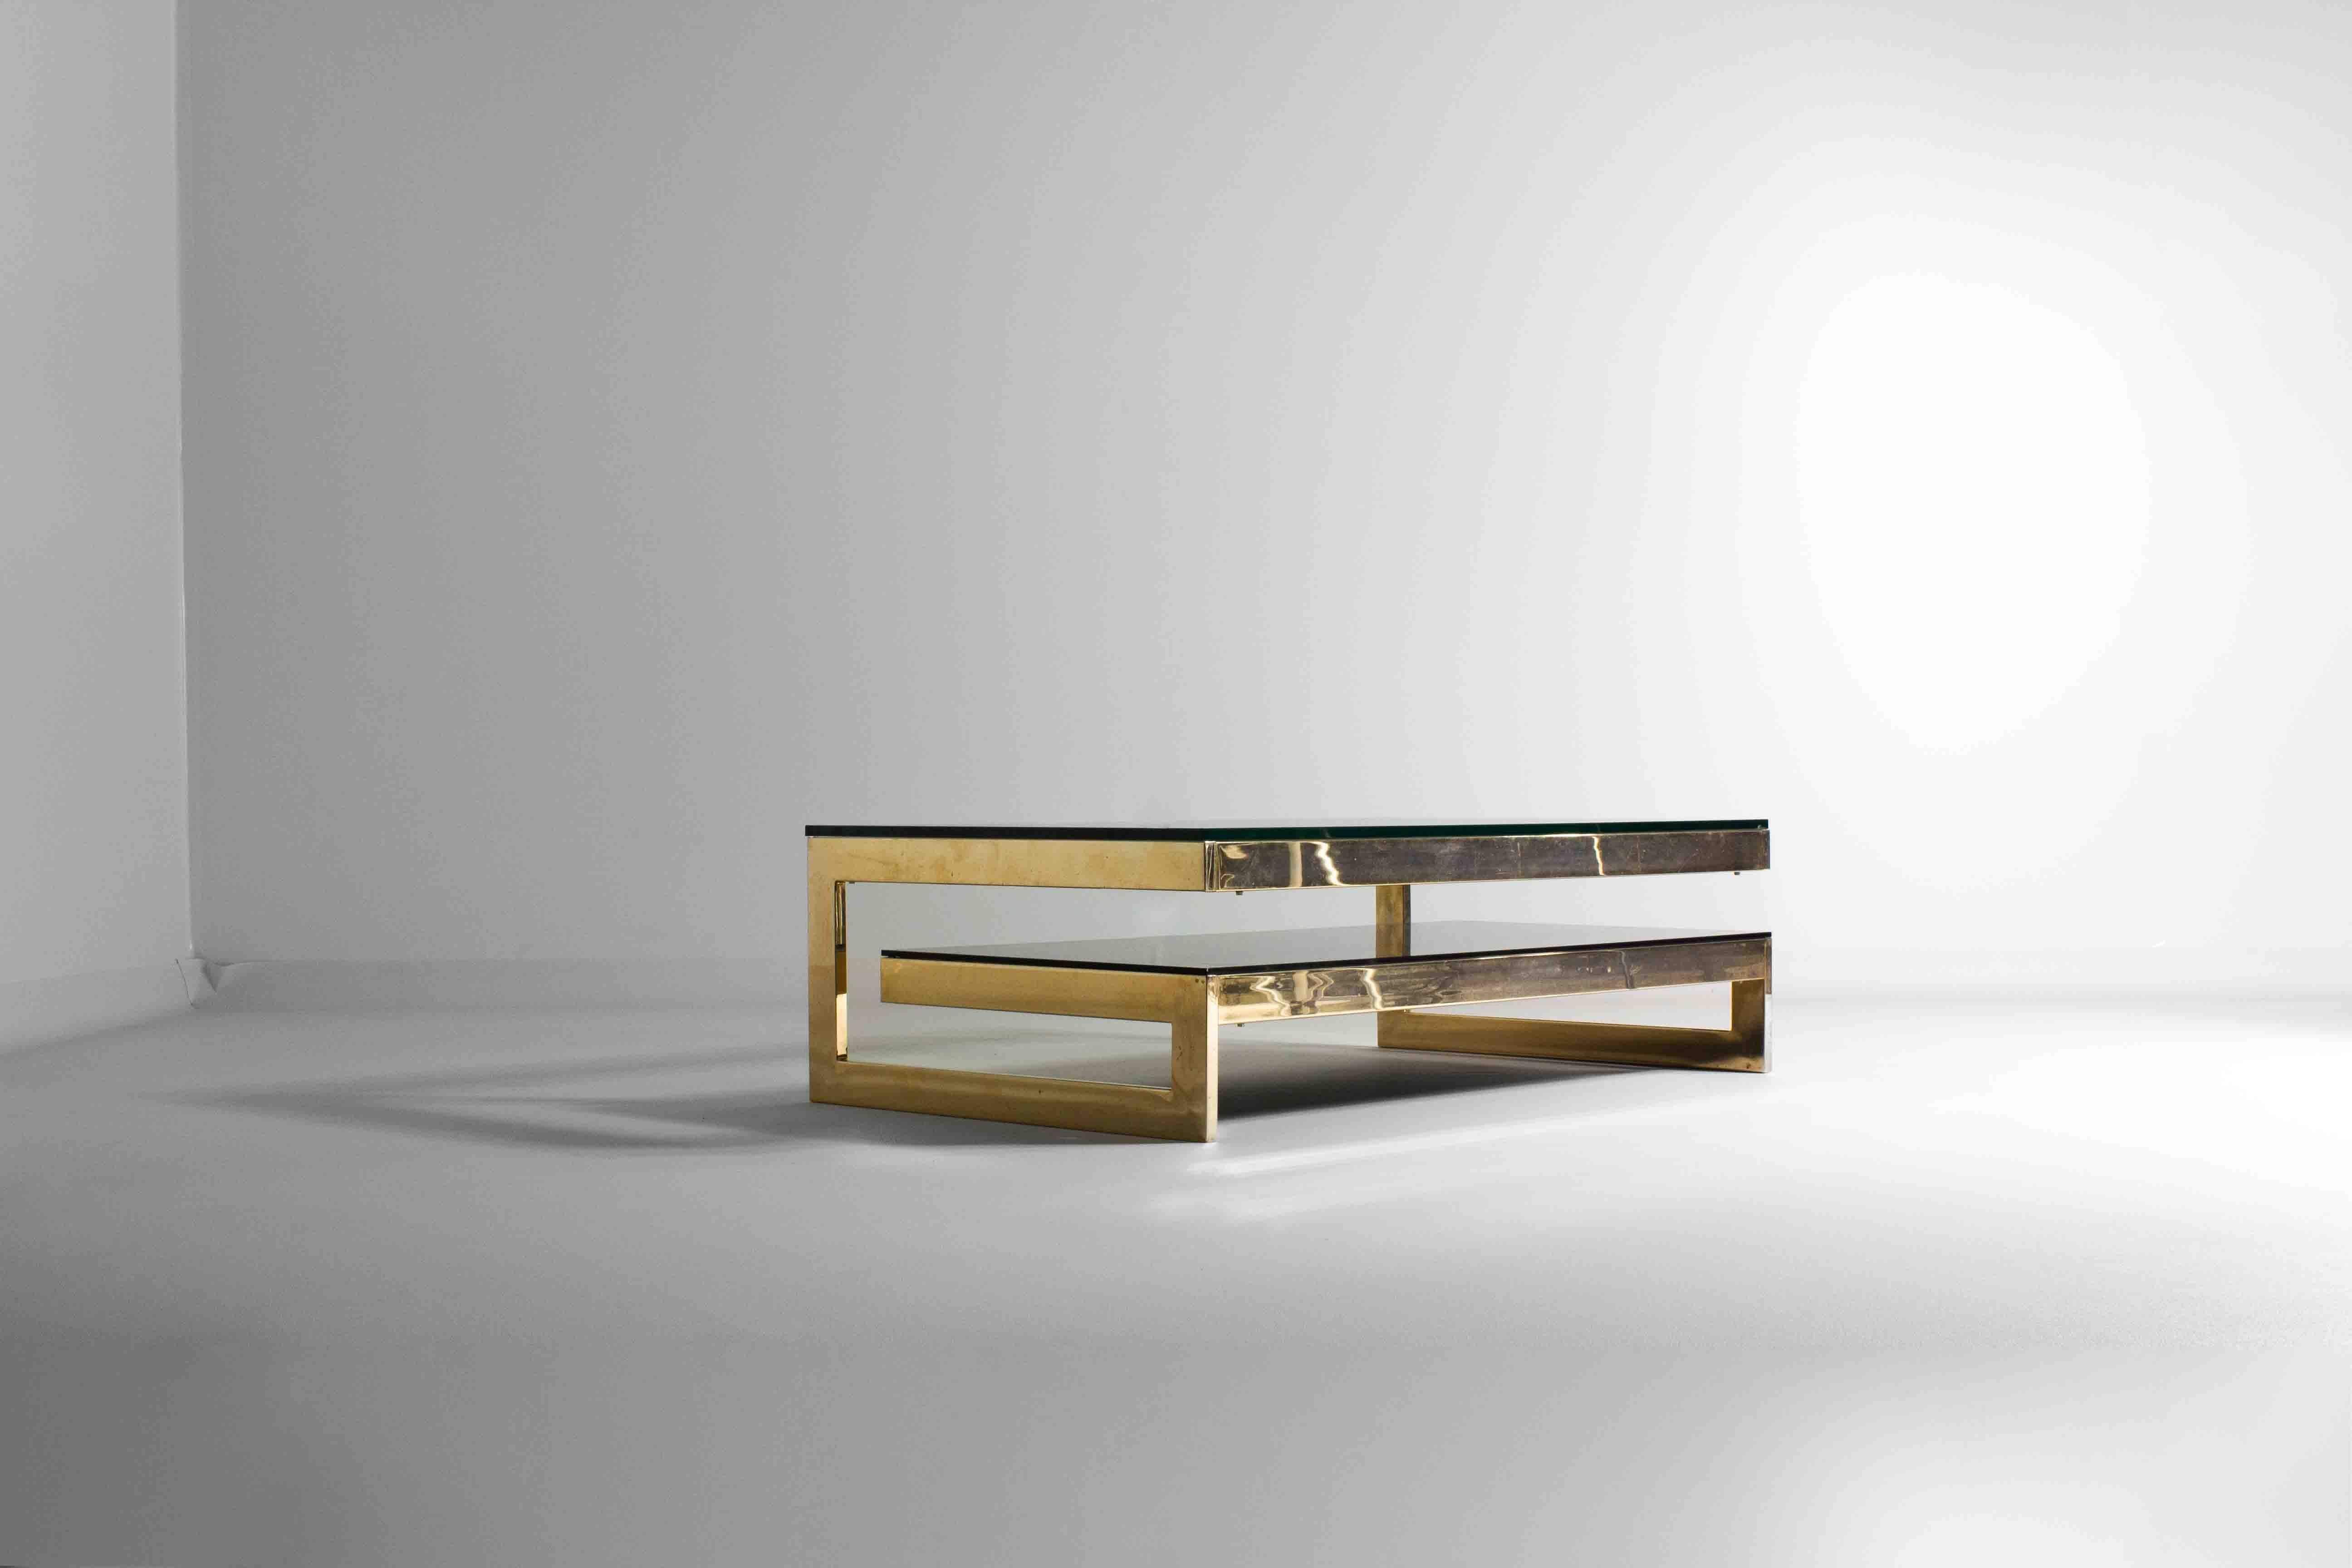 This piece is called the “G-table”, a quintessential piece of 1970s BelgoChrom. The table features a gleaming brass structure with a distinctive G-shaped silhouette that effortlessly balances modernist aesthetics with functional design. Its sleek